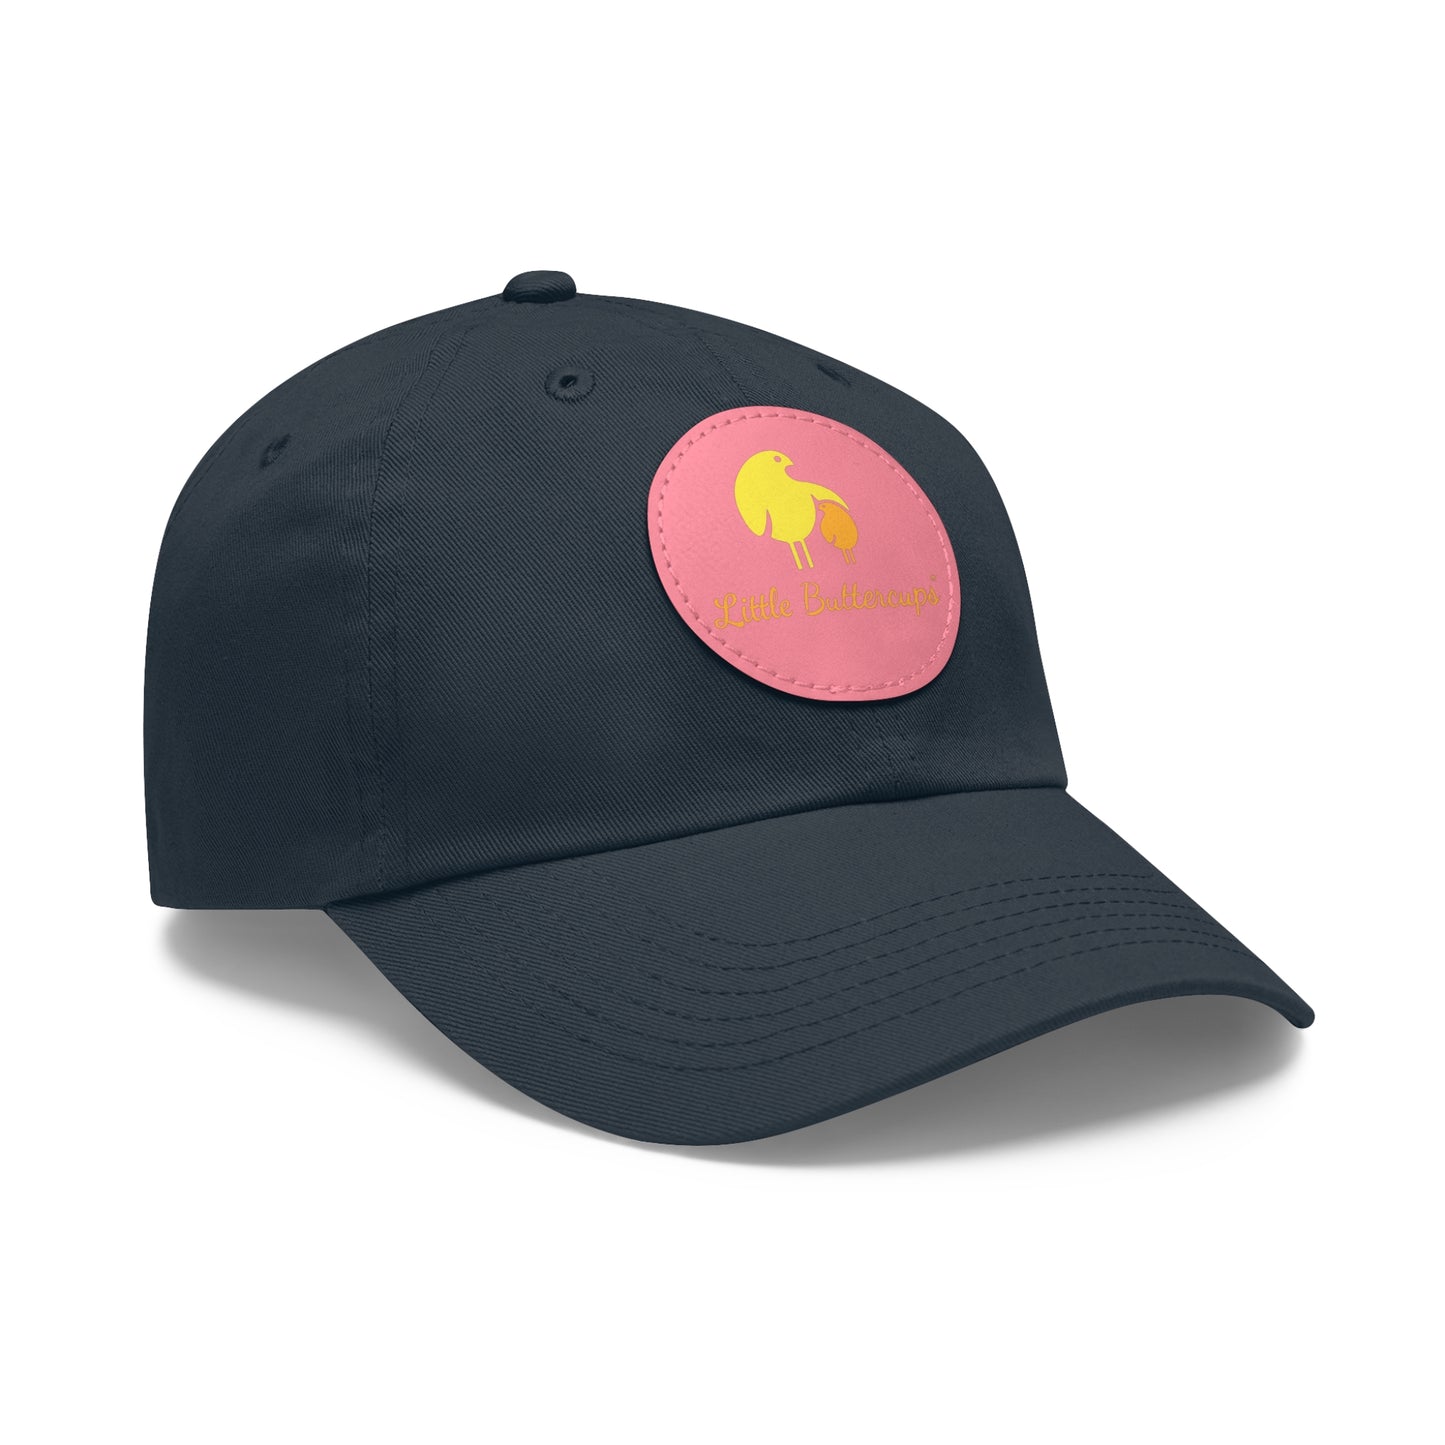 Cap with Leather Patch (Round)